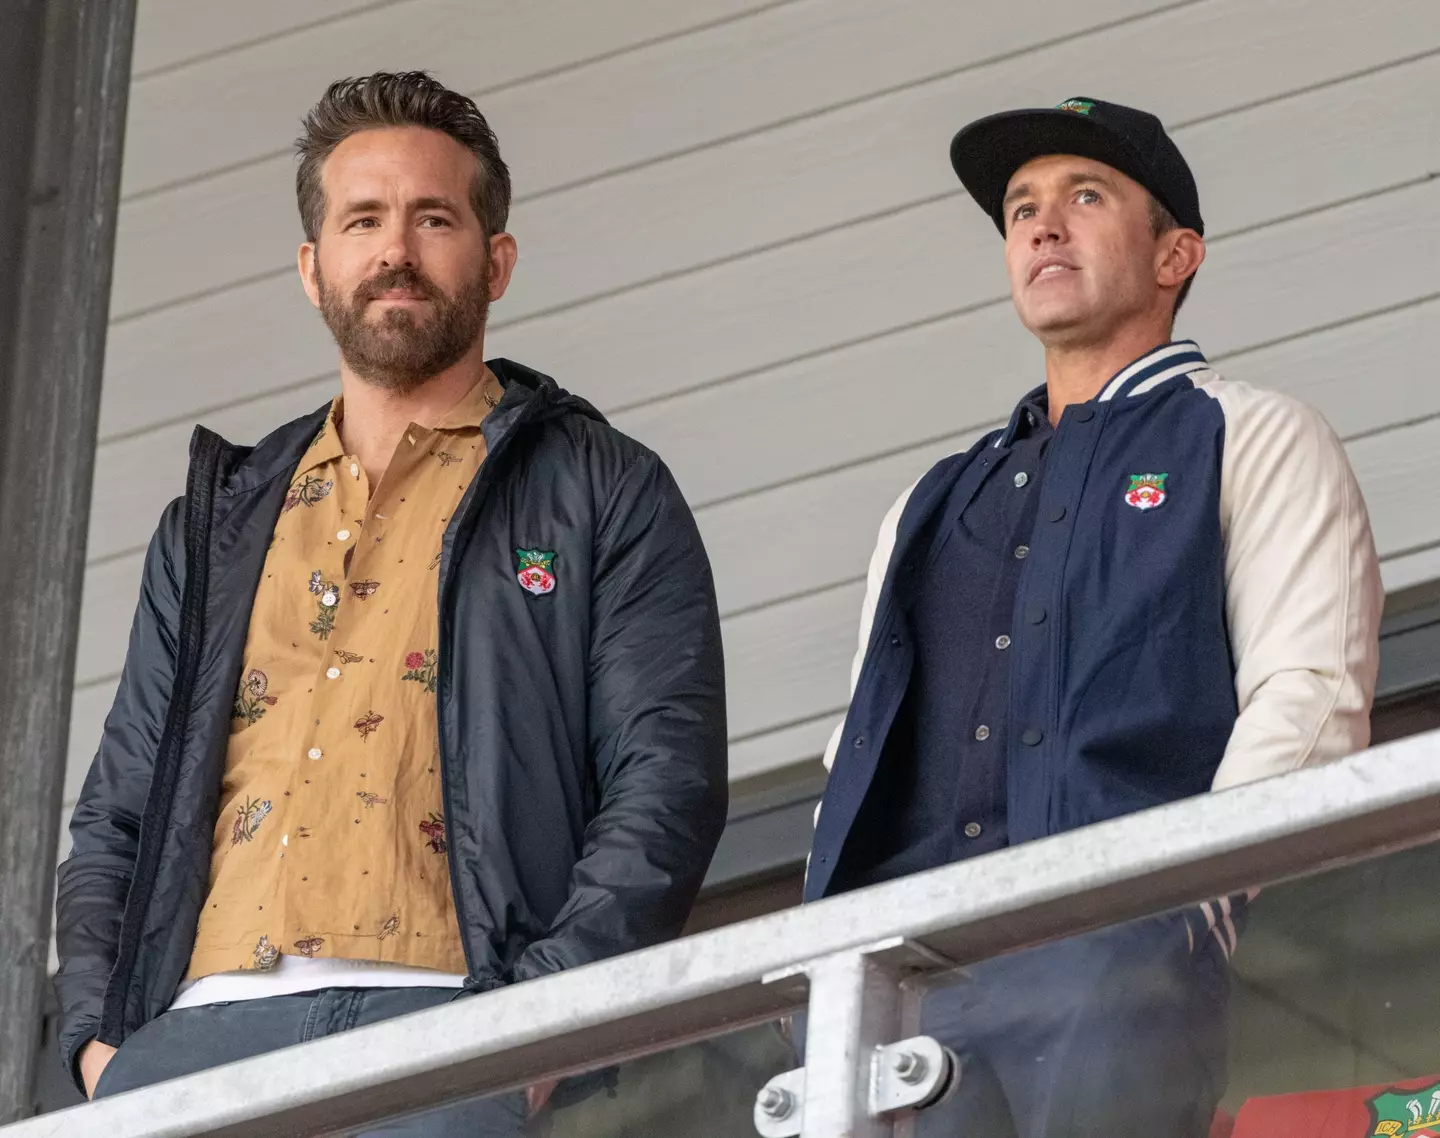 Ryan Reynolds and Rob McElhenney in the stands at Wrexham. (Image: Alamy)